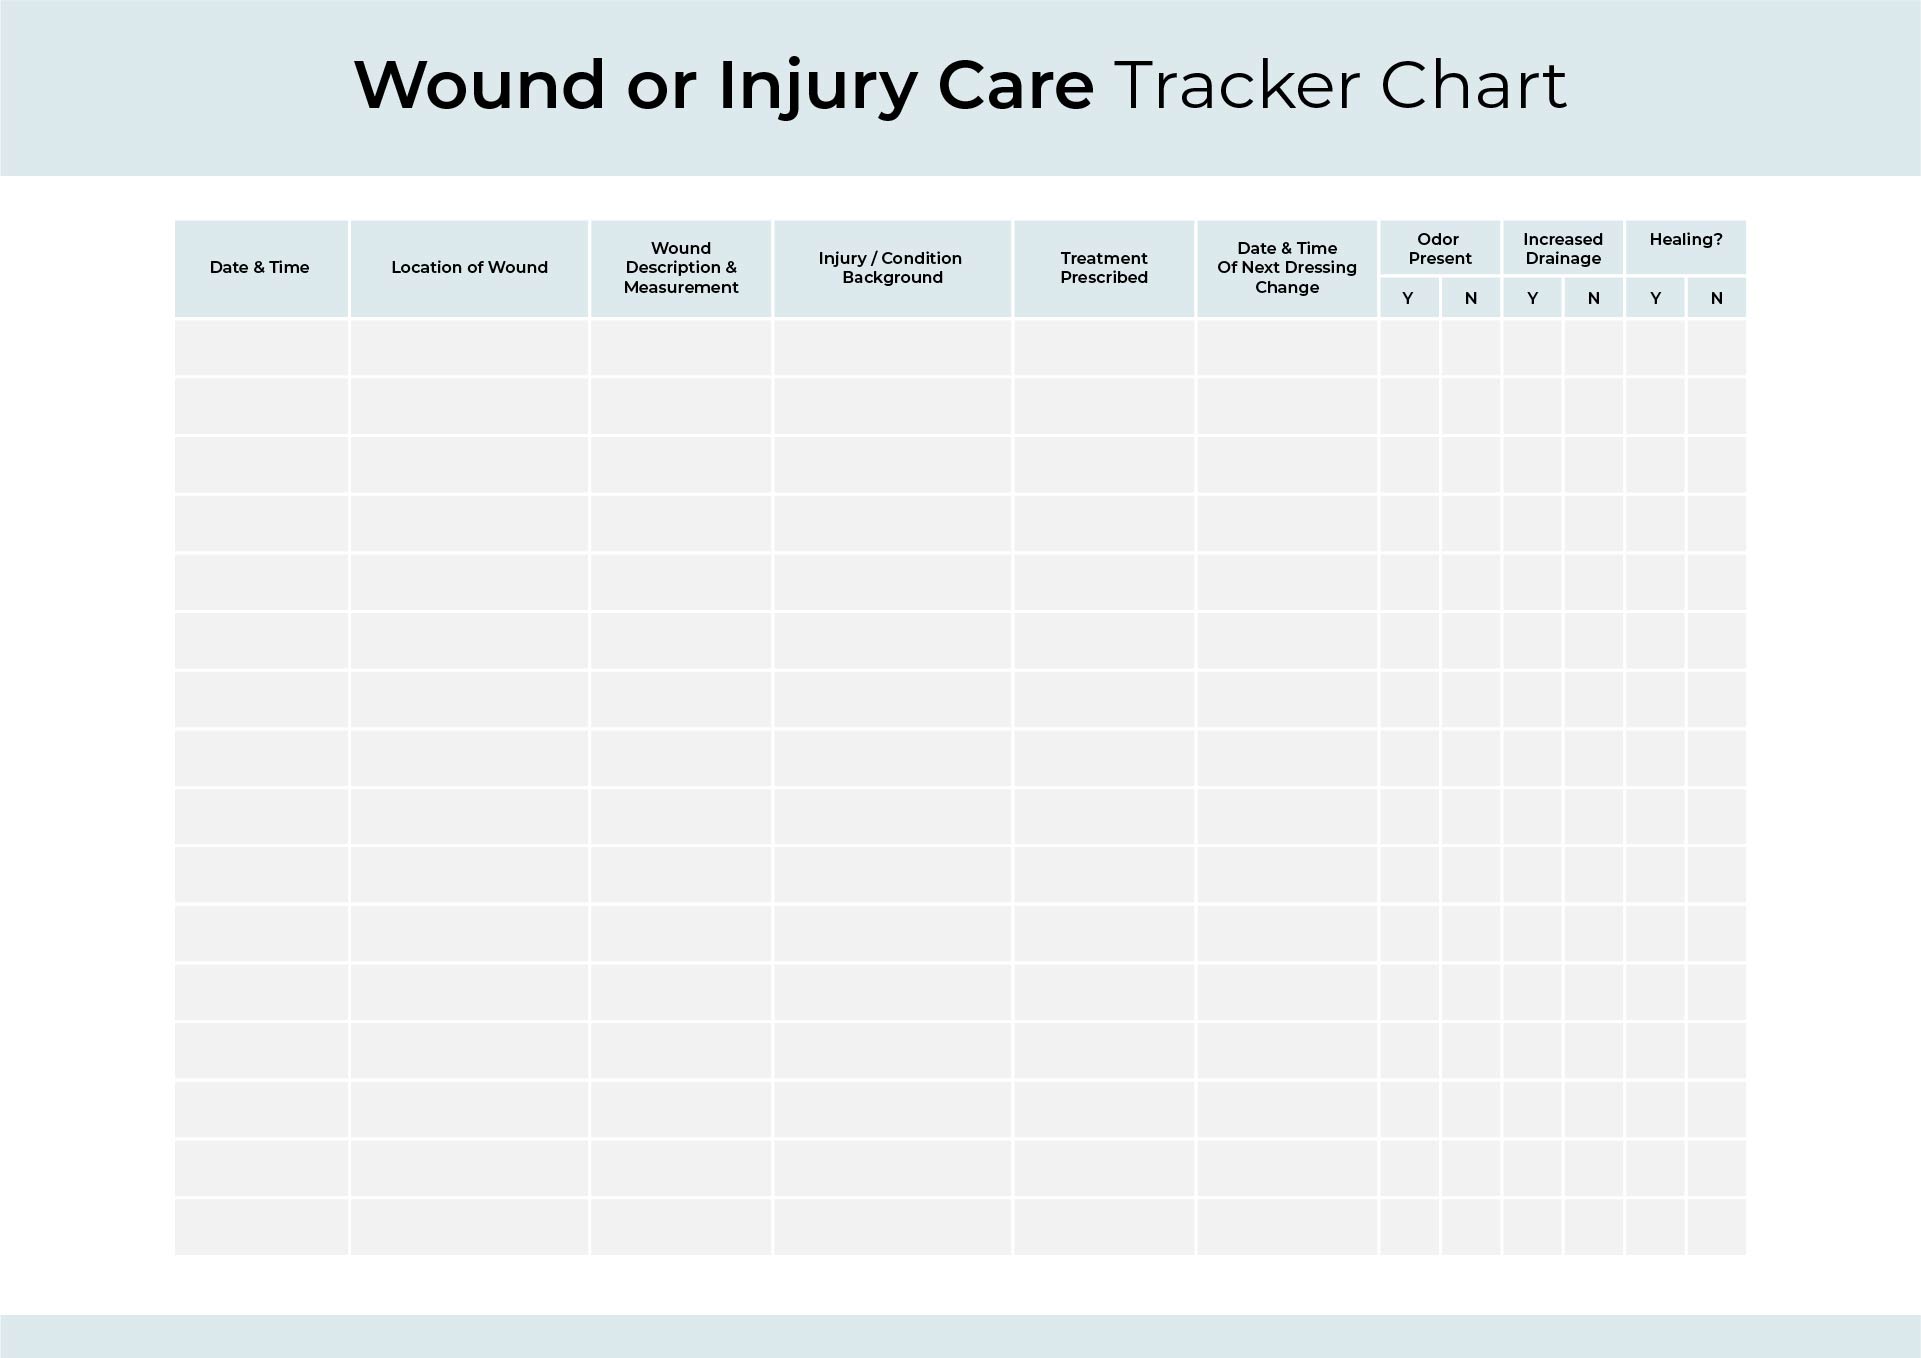 Wound Care Flow Sheet Template